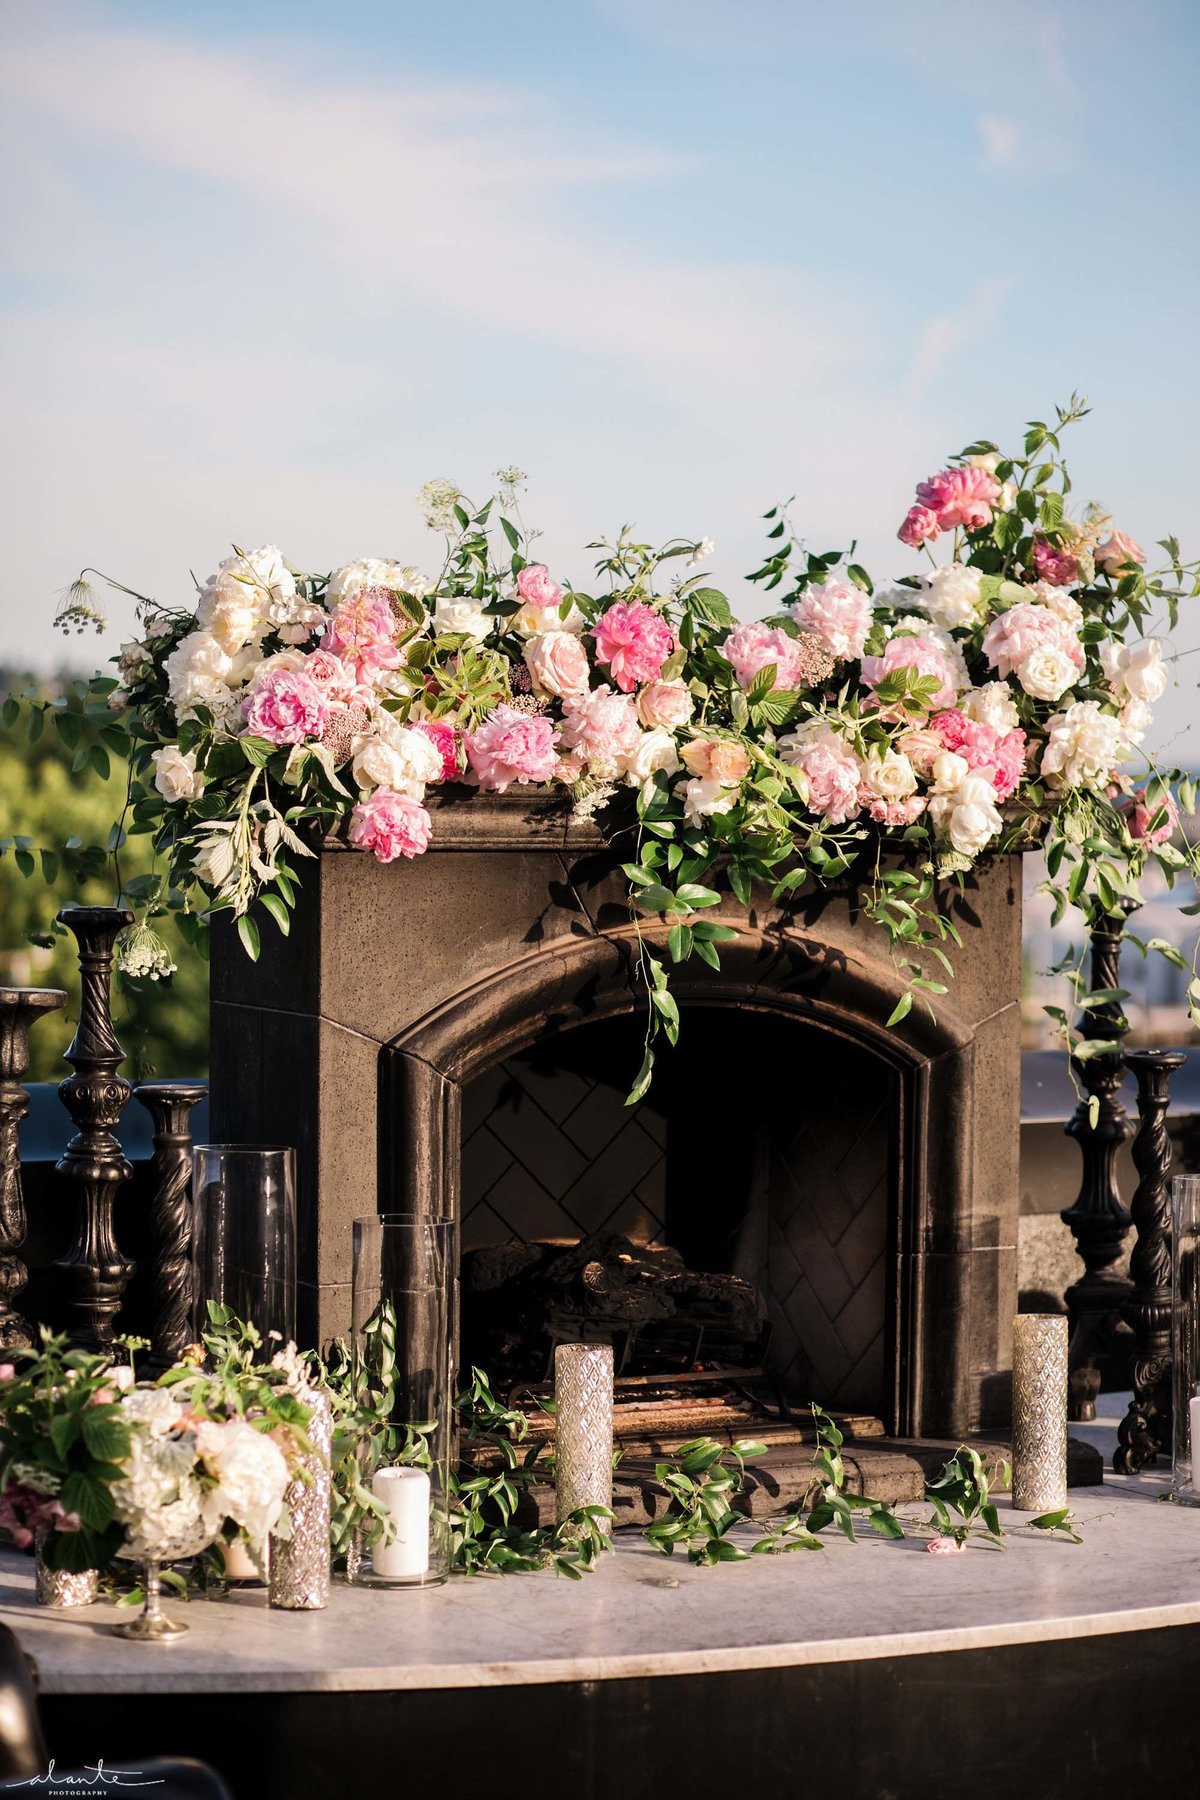 Hotel Ballard has a stunning rooftop fireplace we decorated with a huge peony floral instillation.